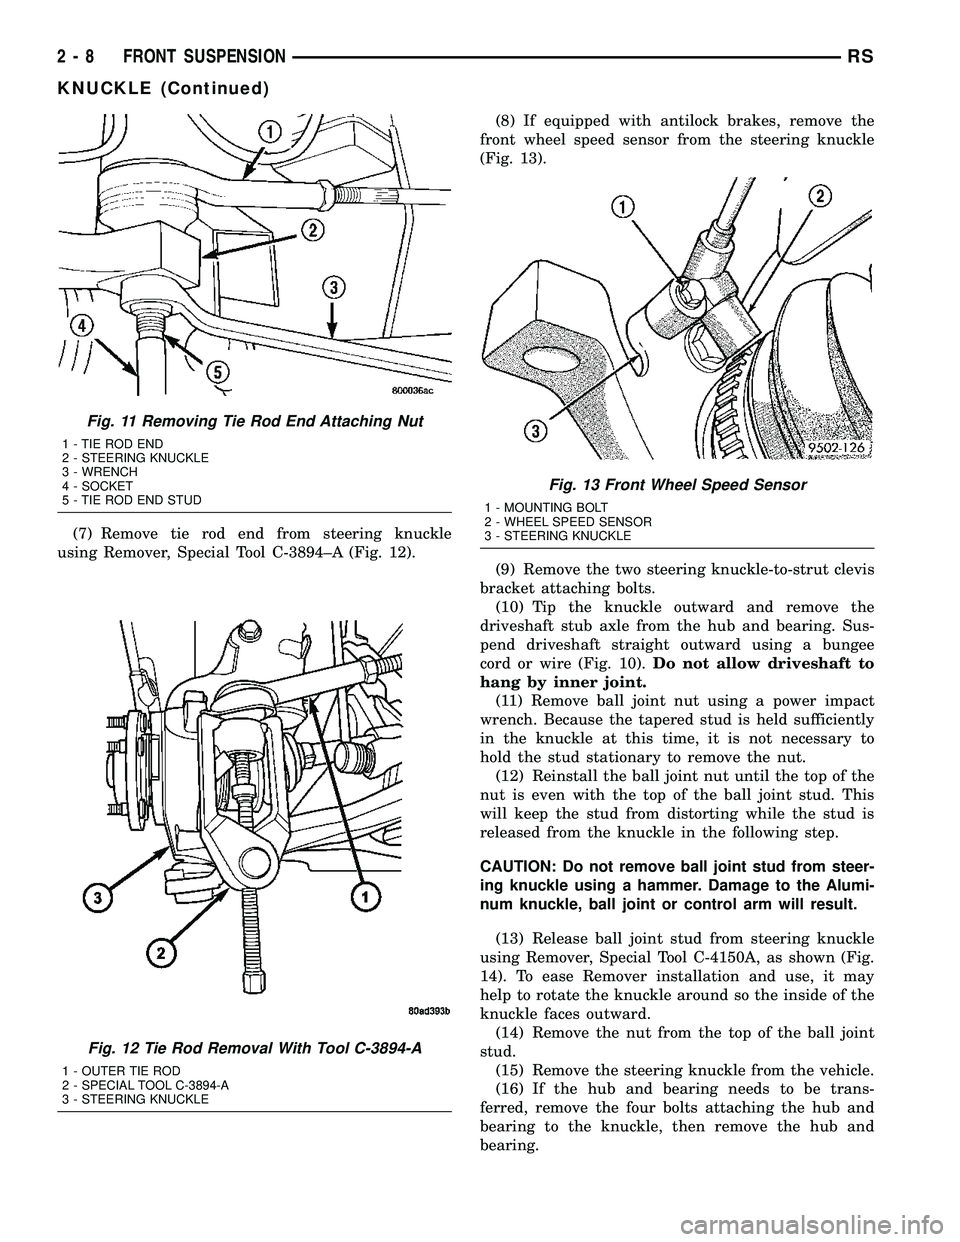 CHRYSLER CARAVAN 2005 Workshop Manual (7) Remove tie rod end from steering knuckle
using Remover, Special Tool C-3894±A (Fig. 12).(8) If equipped with antilock brakes, remove the
front wheel speed sensor from the steering knuckle
(Fig. 1